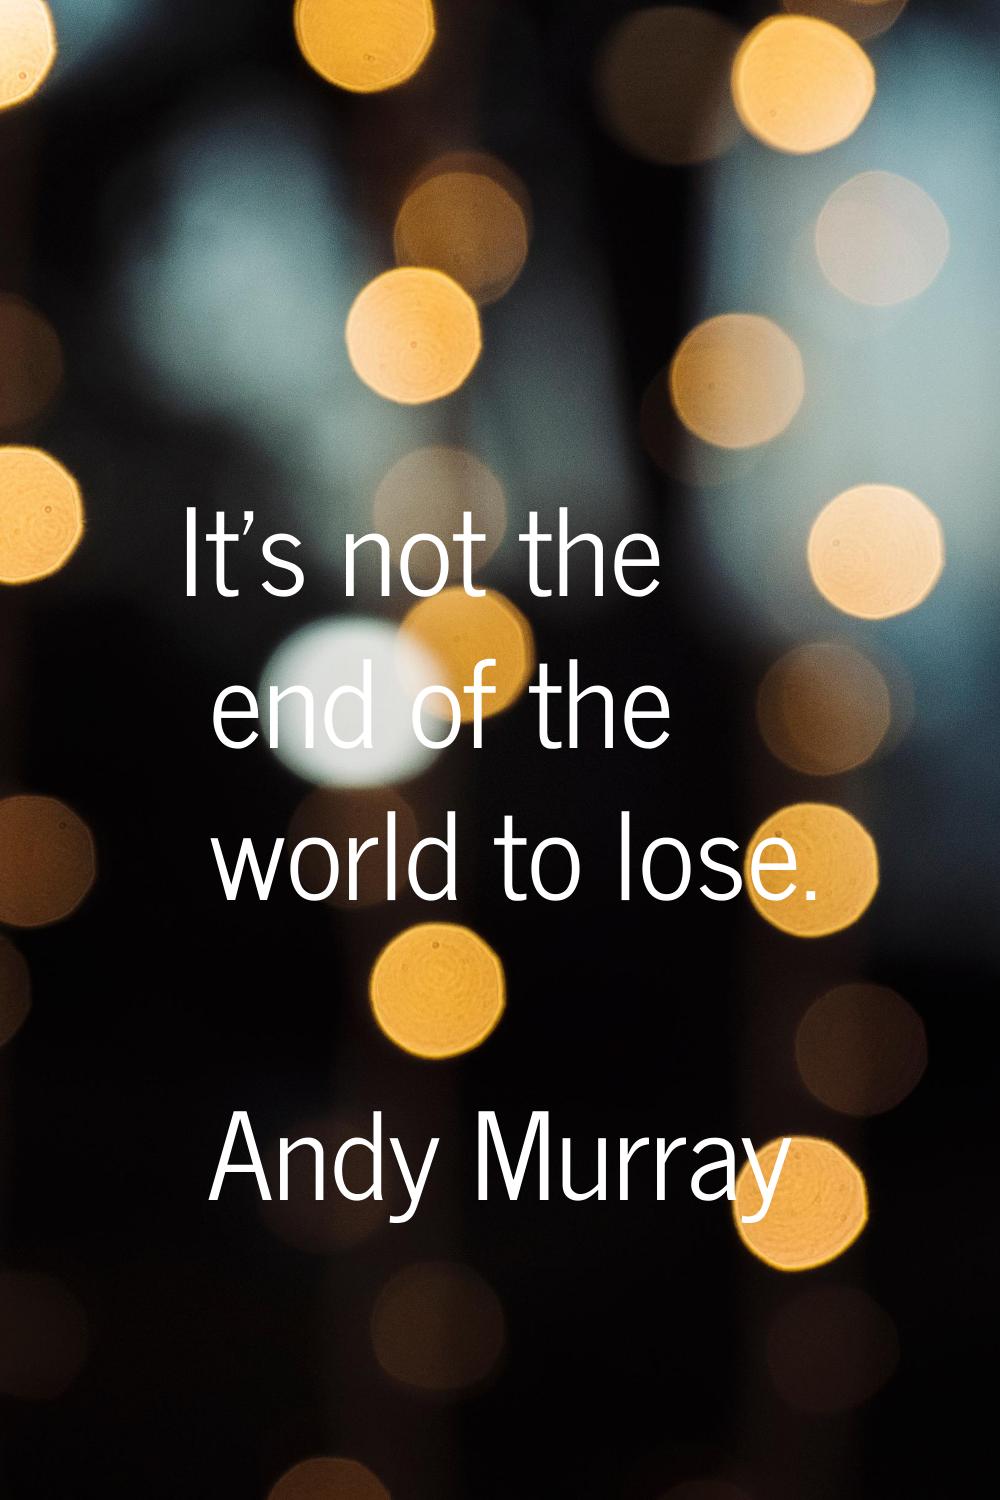 It's not the end of the world to lose.